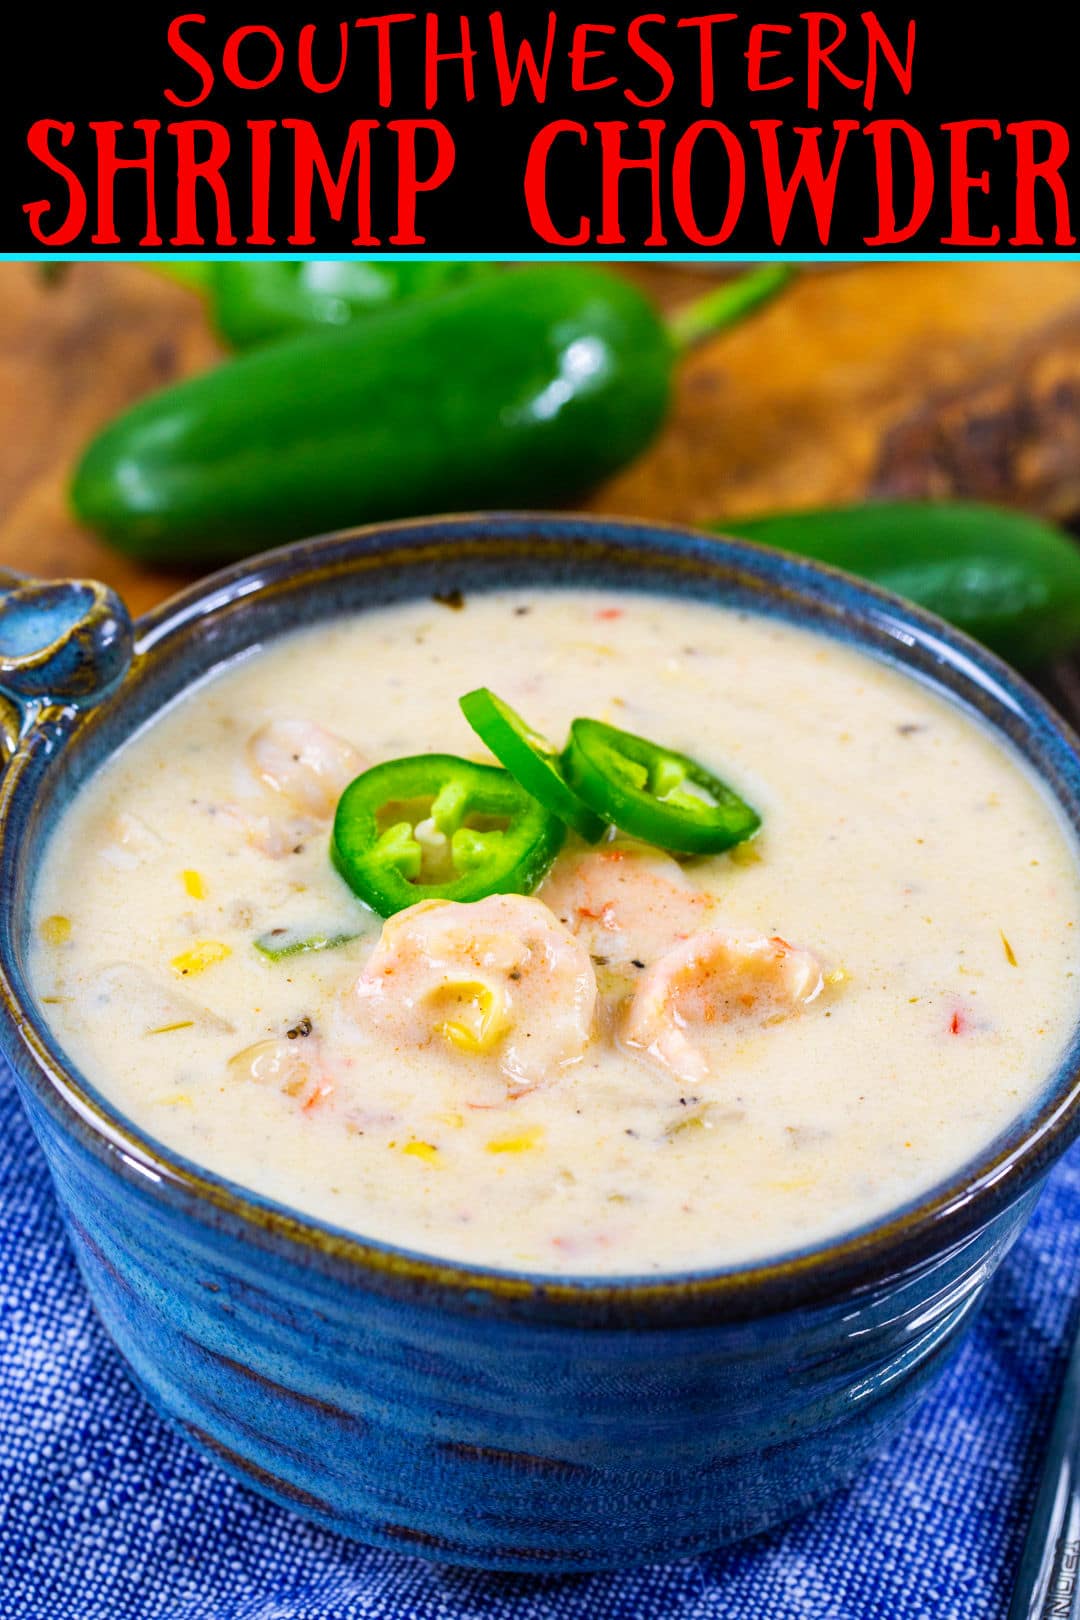 Chowder topped with jalapeno slices  in a blue bowl.